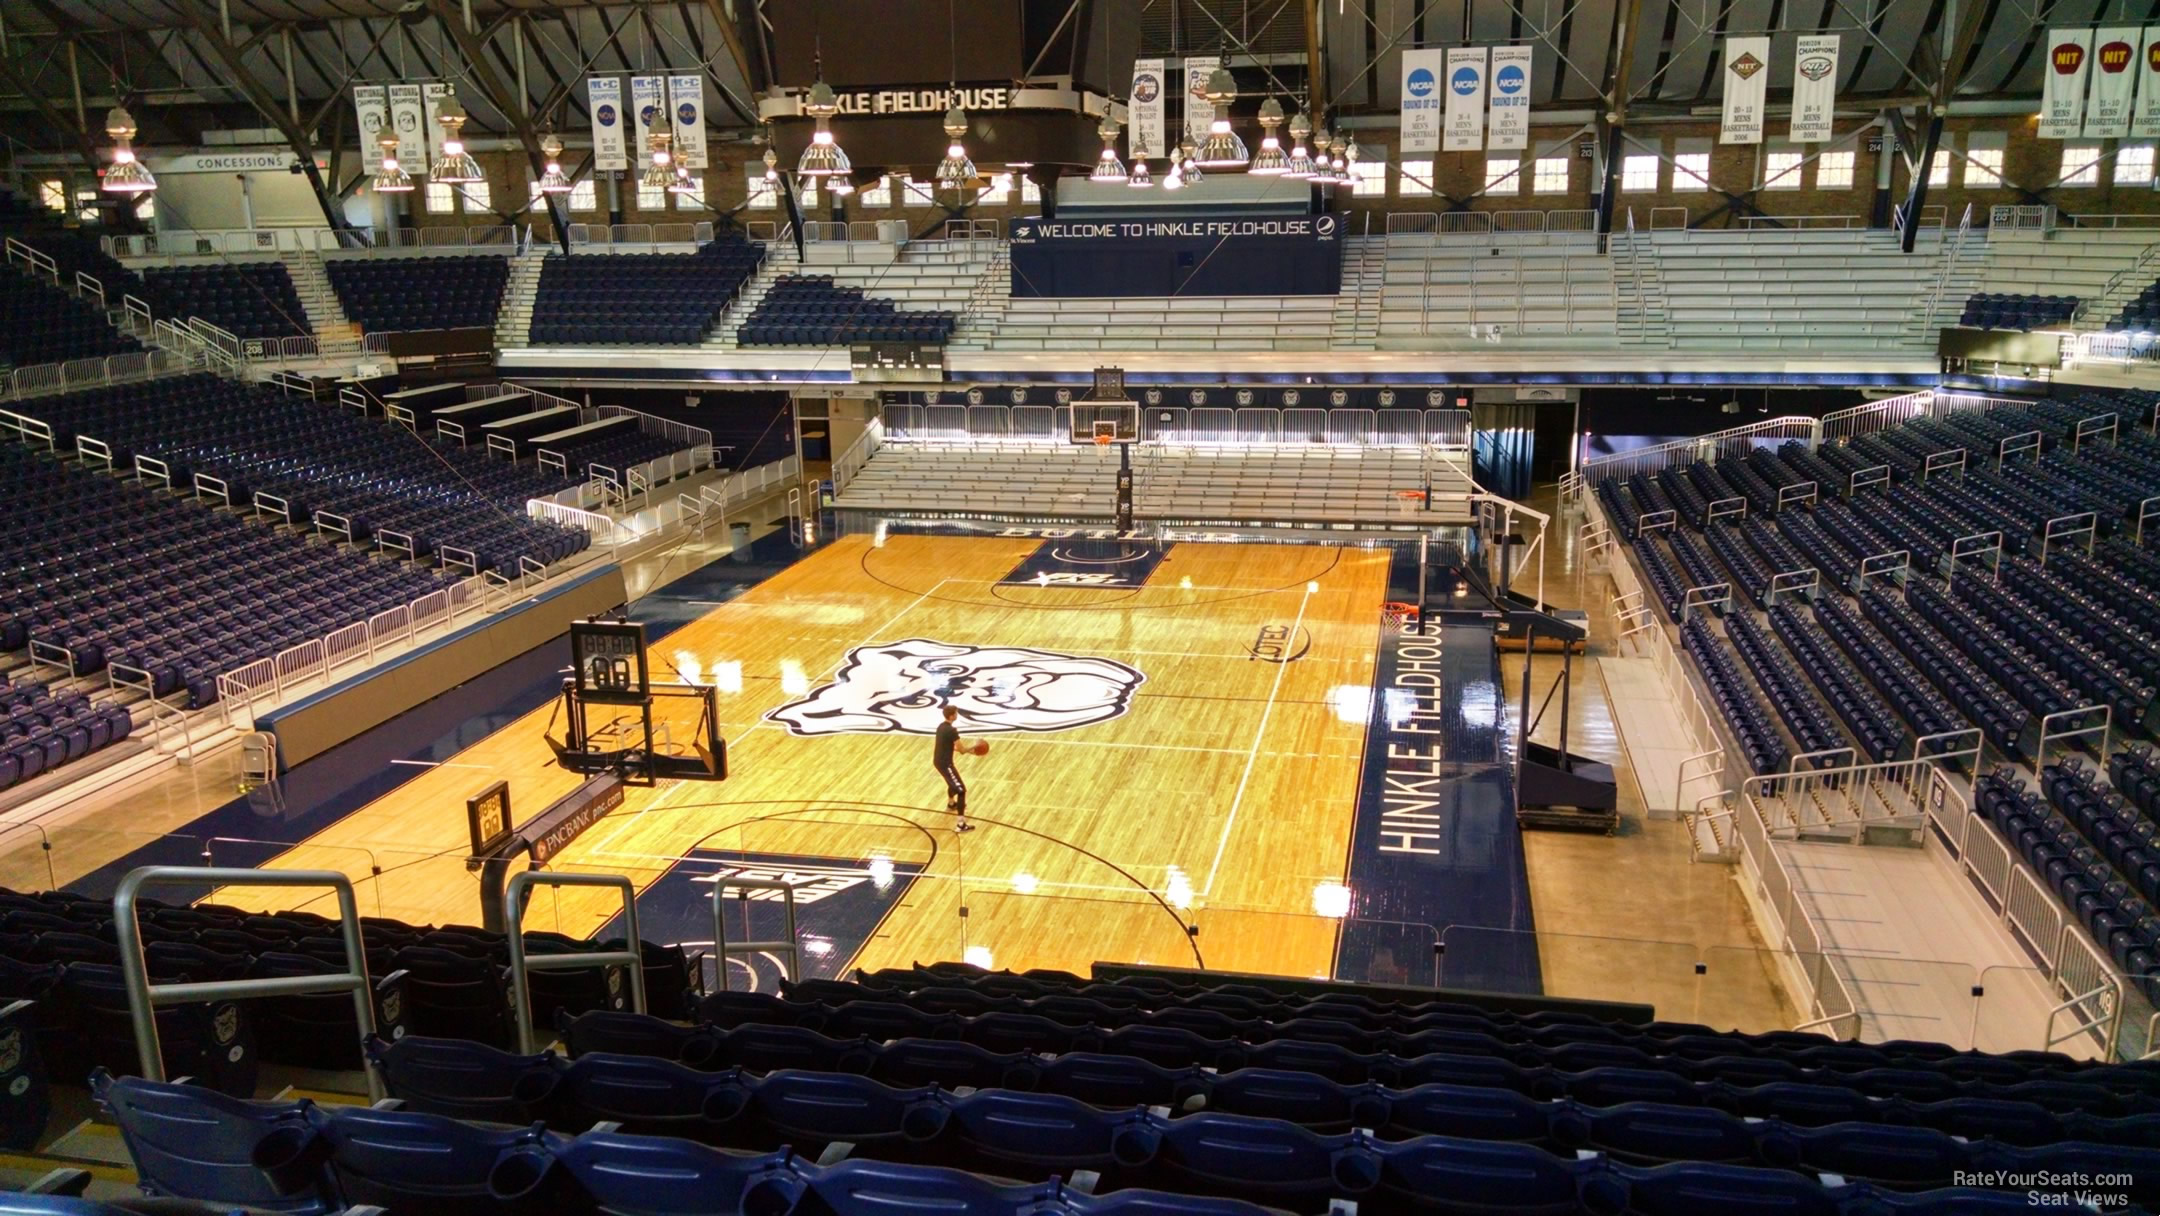 section 223, row 10 seat view  - hinkle fieldhouse